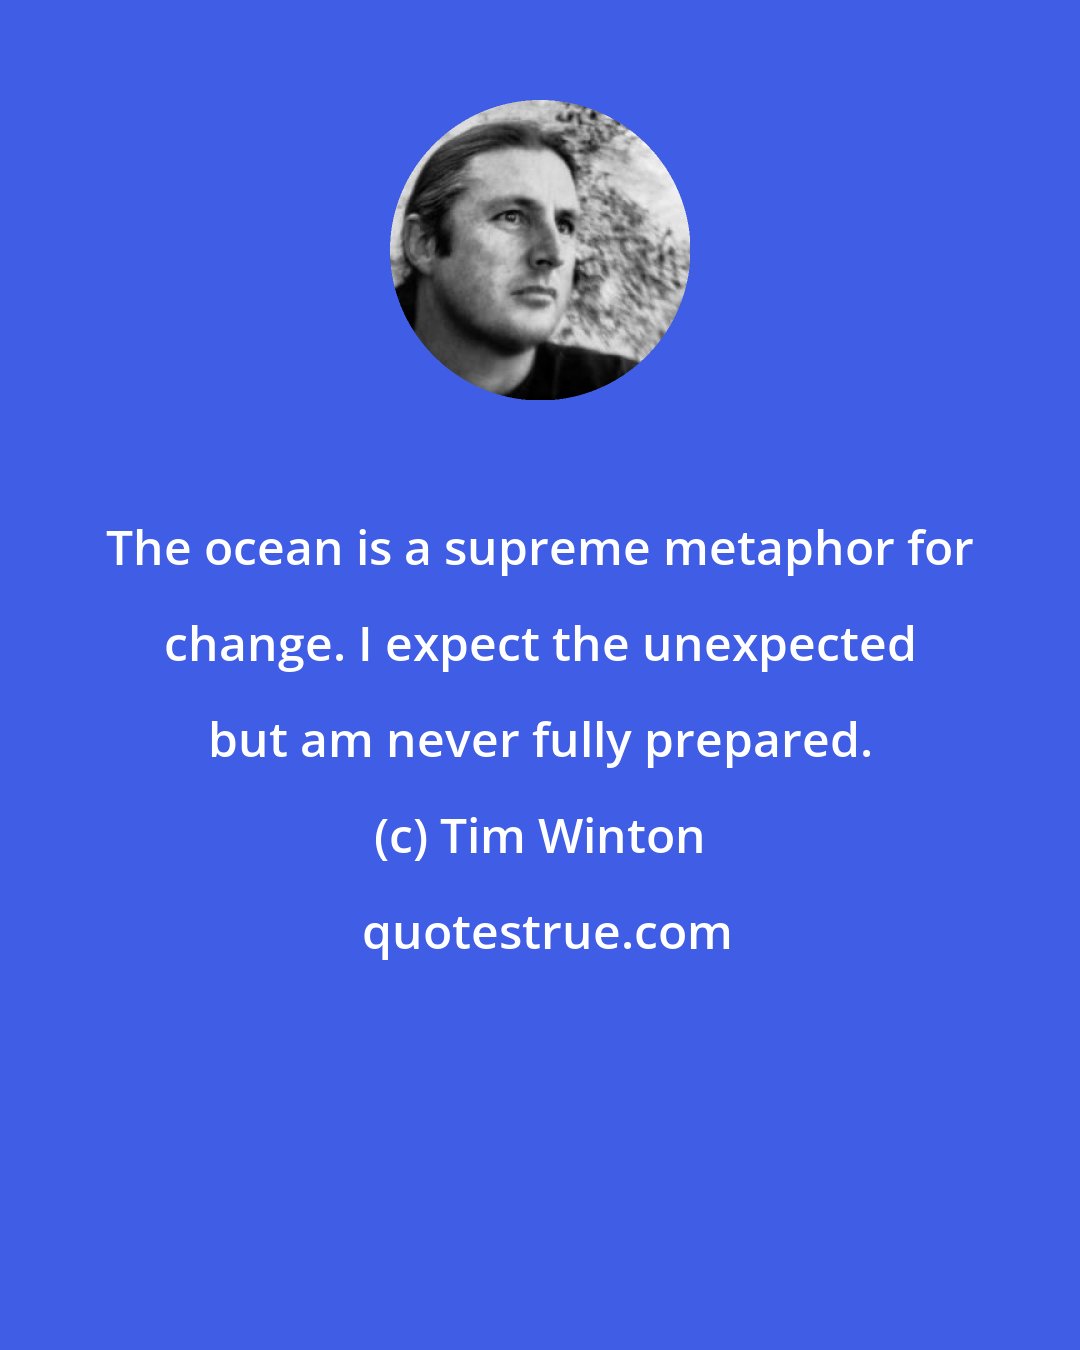 Tim Winton: The ocean is a supreme metaphor for change. I expect the unexpected but am never fully prepared.